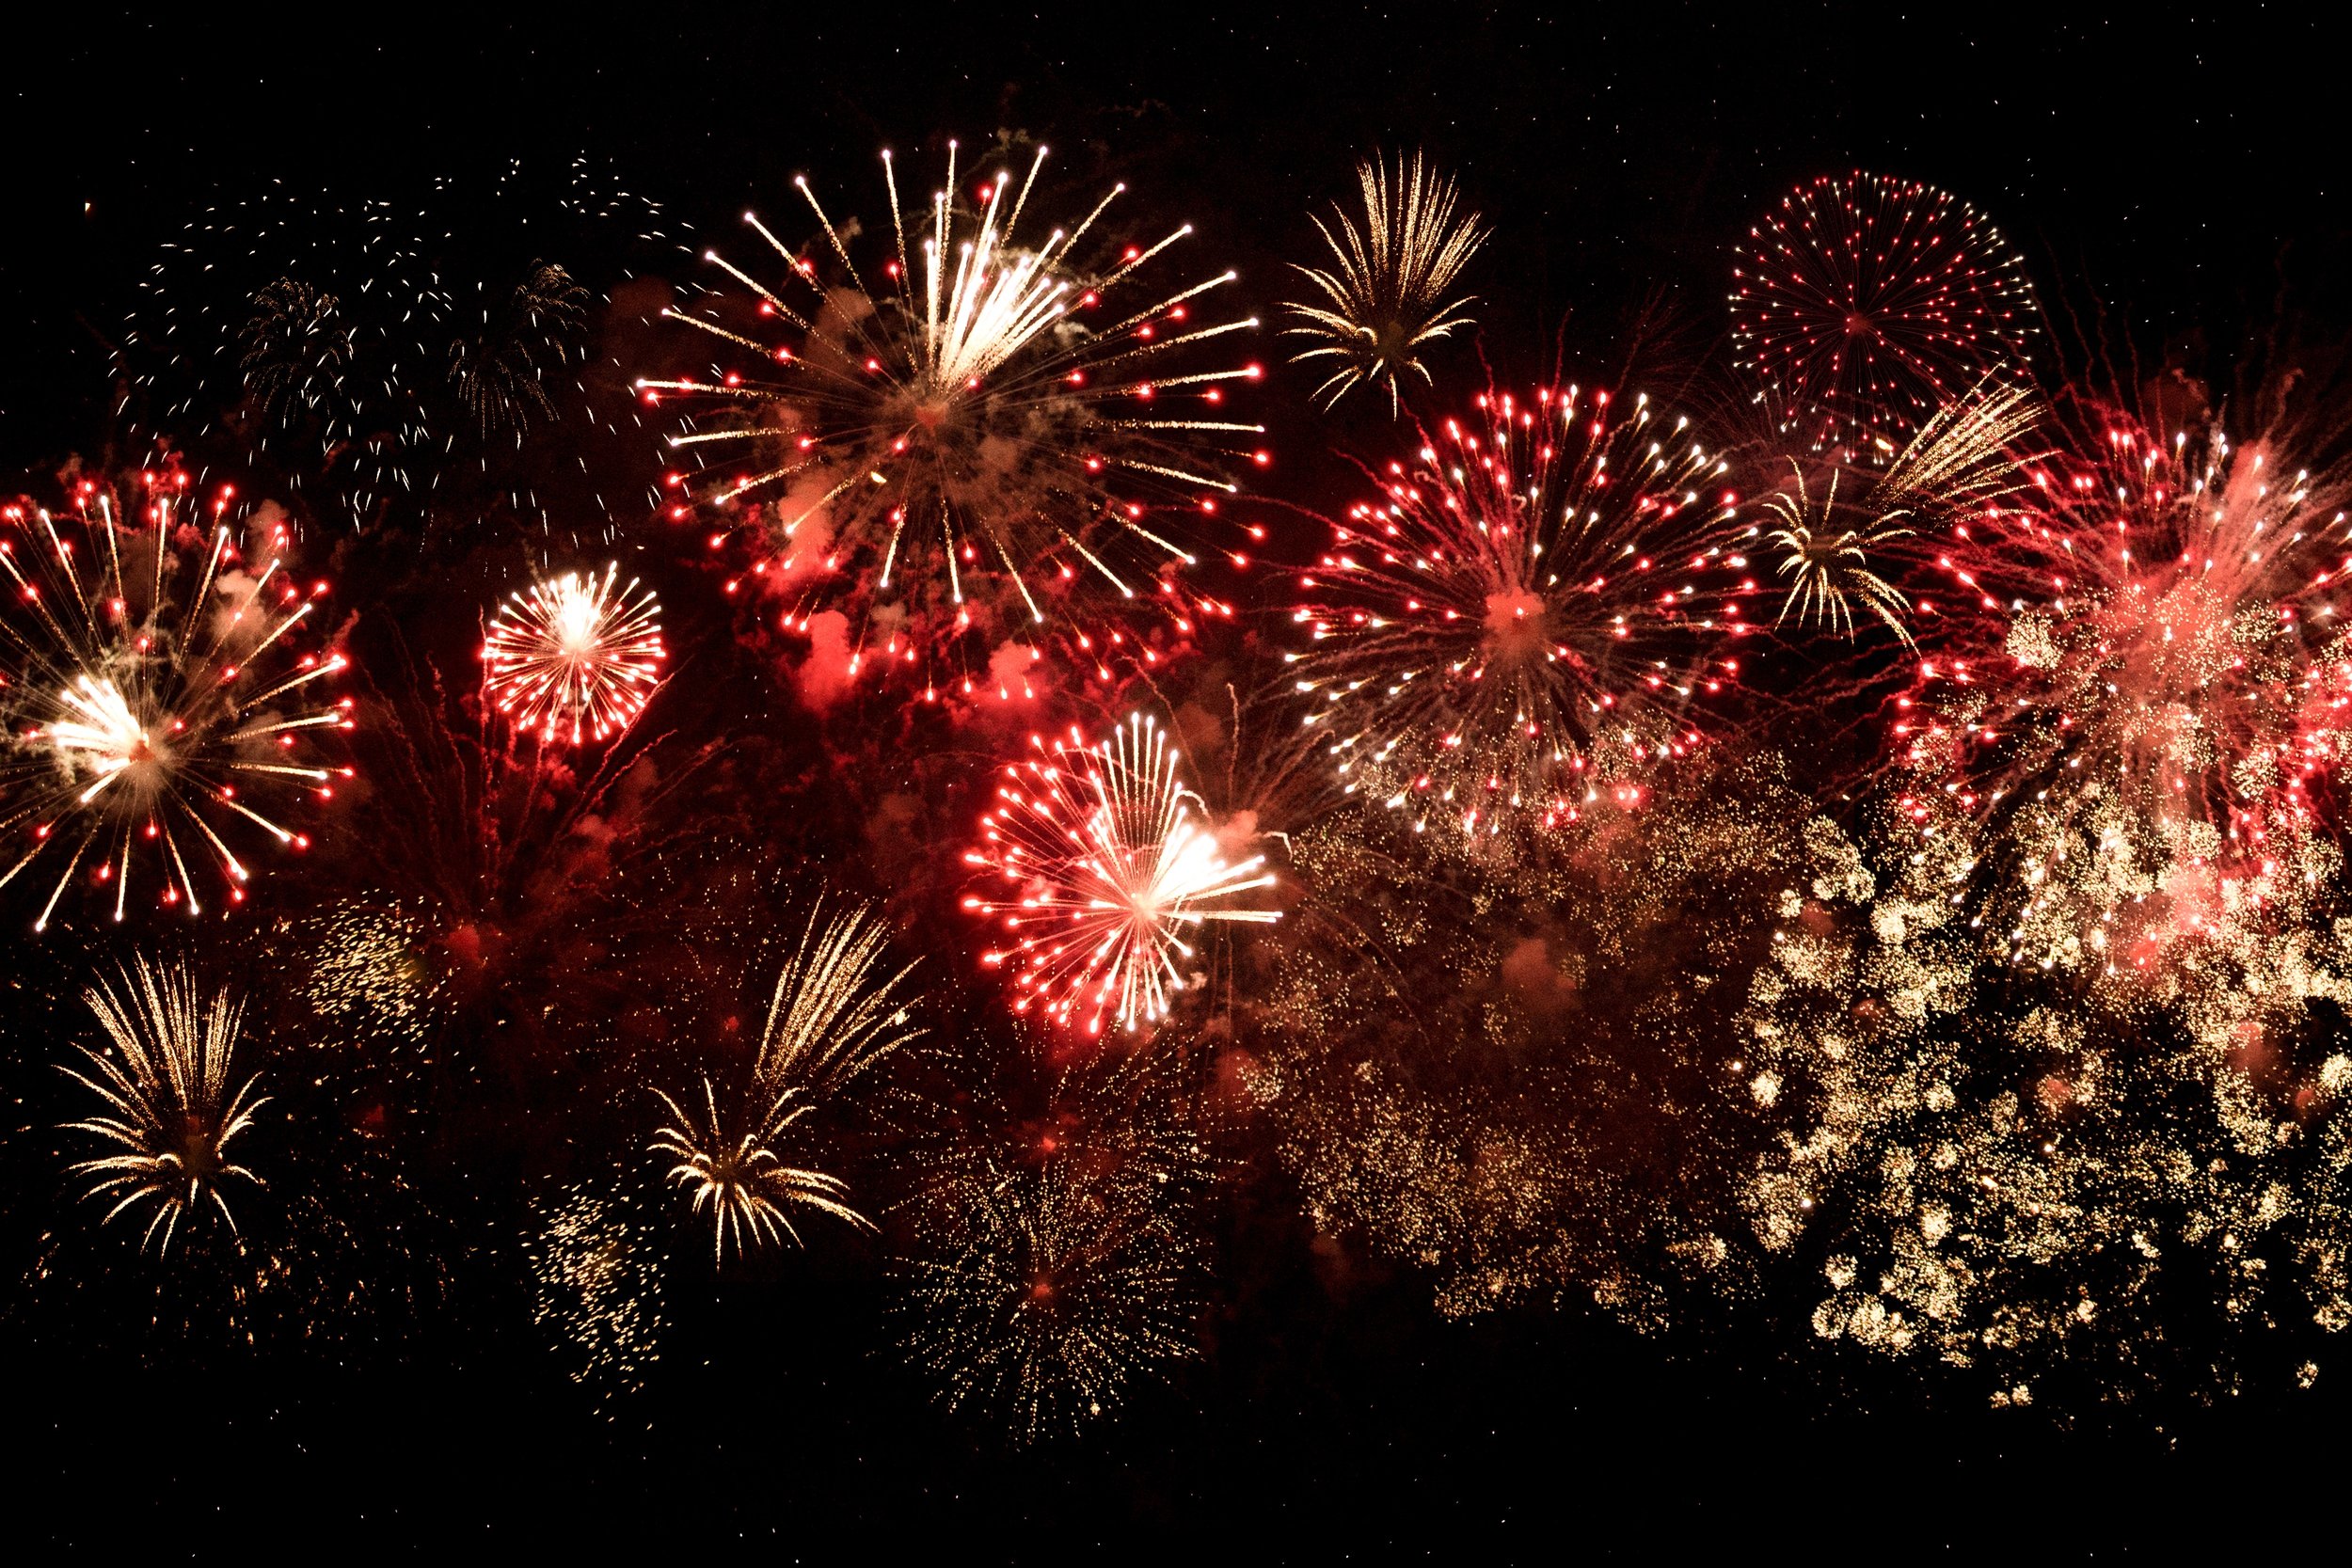 A typical fireworks scene